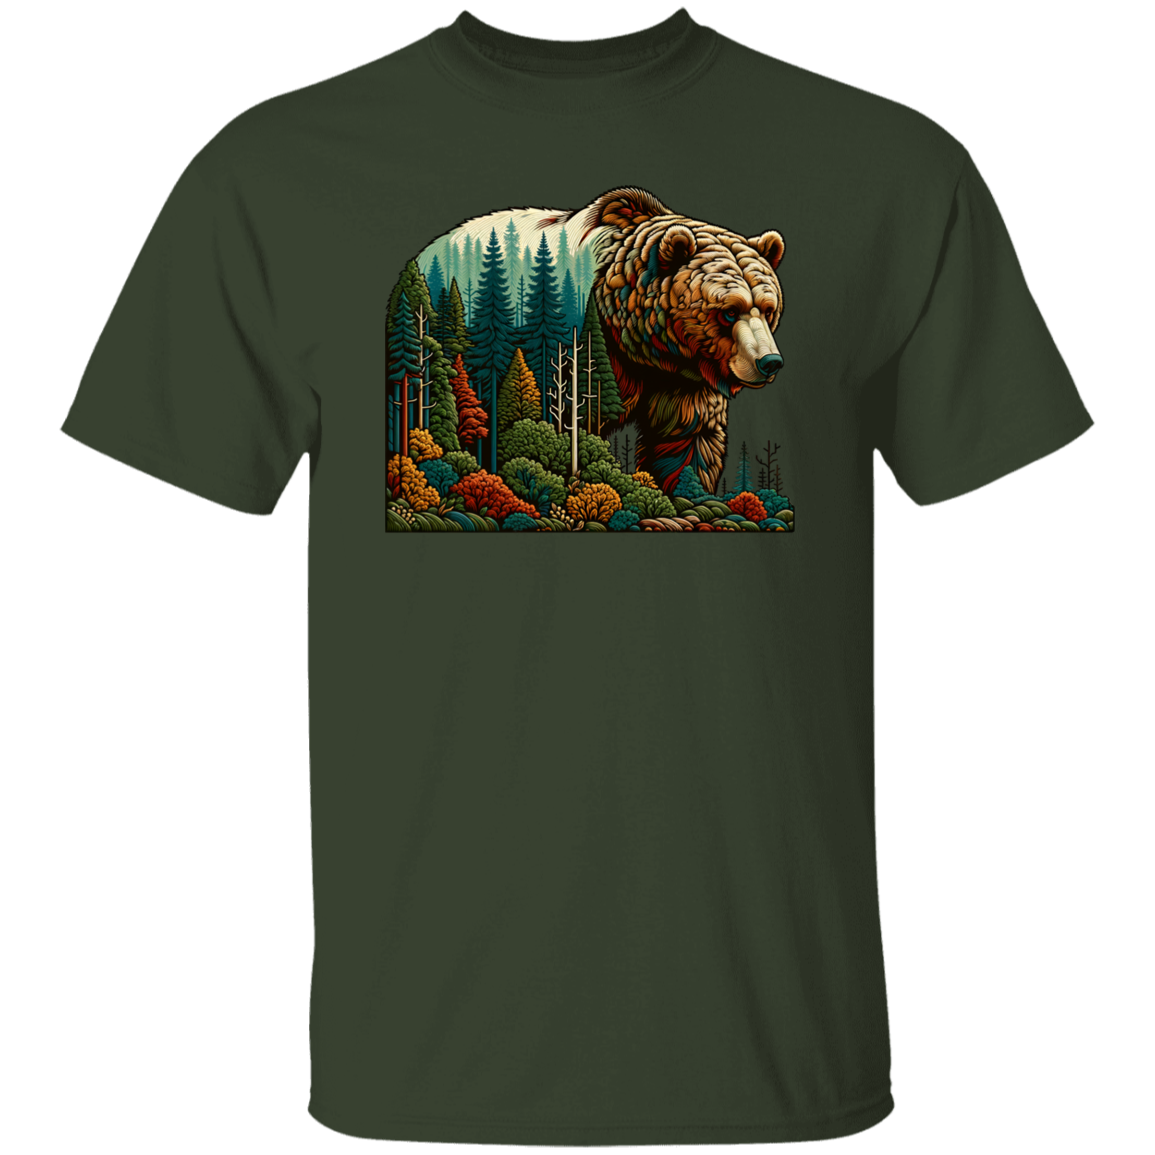 Guardian Grizzly - T-shirts, Hoodies and Sweatshirts